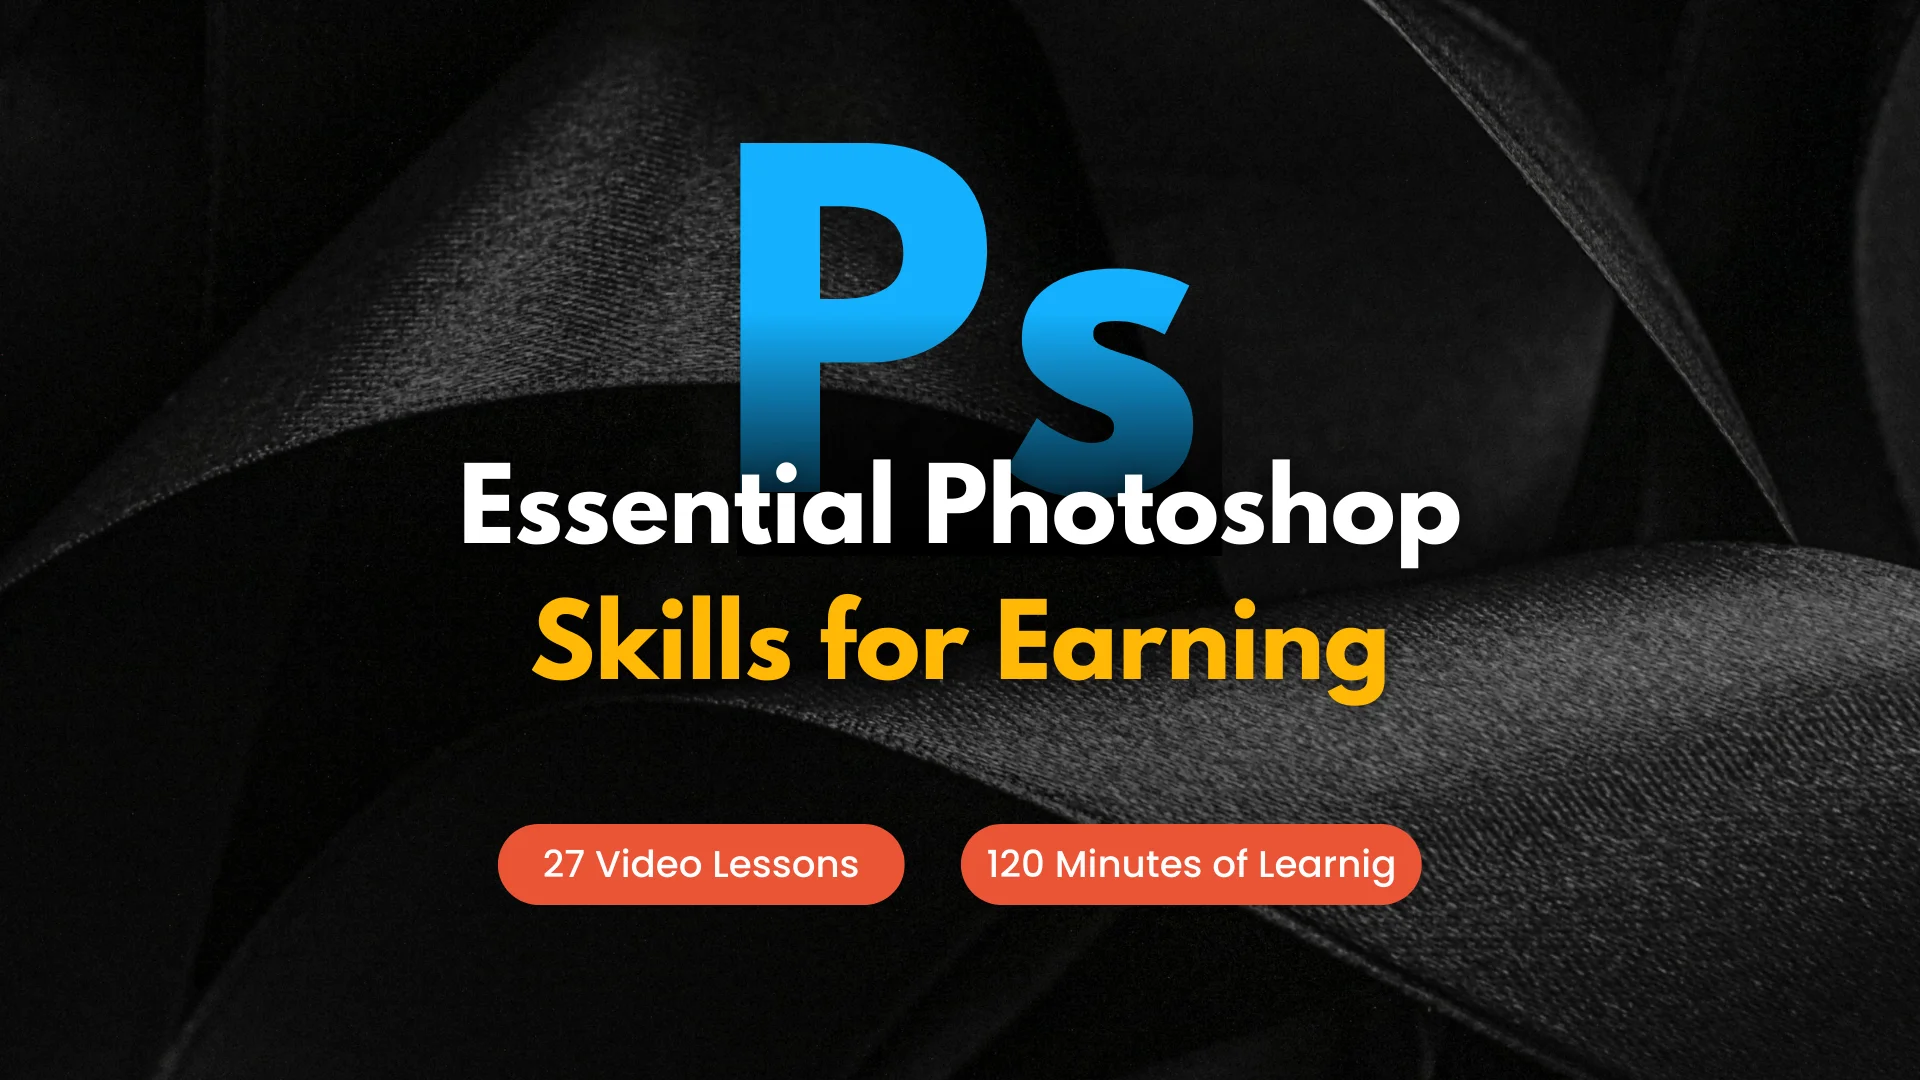 Essential Photoshop Skills for Earning Course in Bangladesh Image